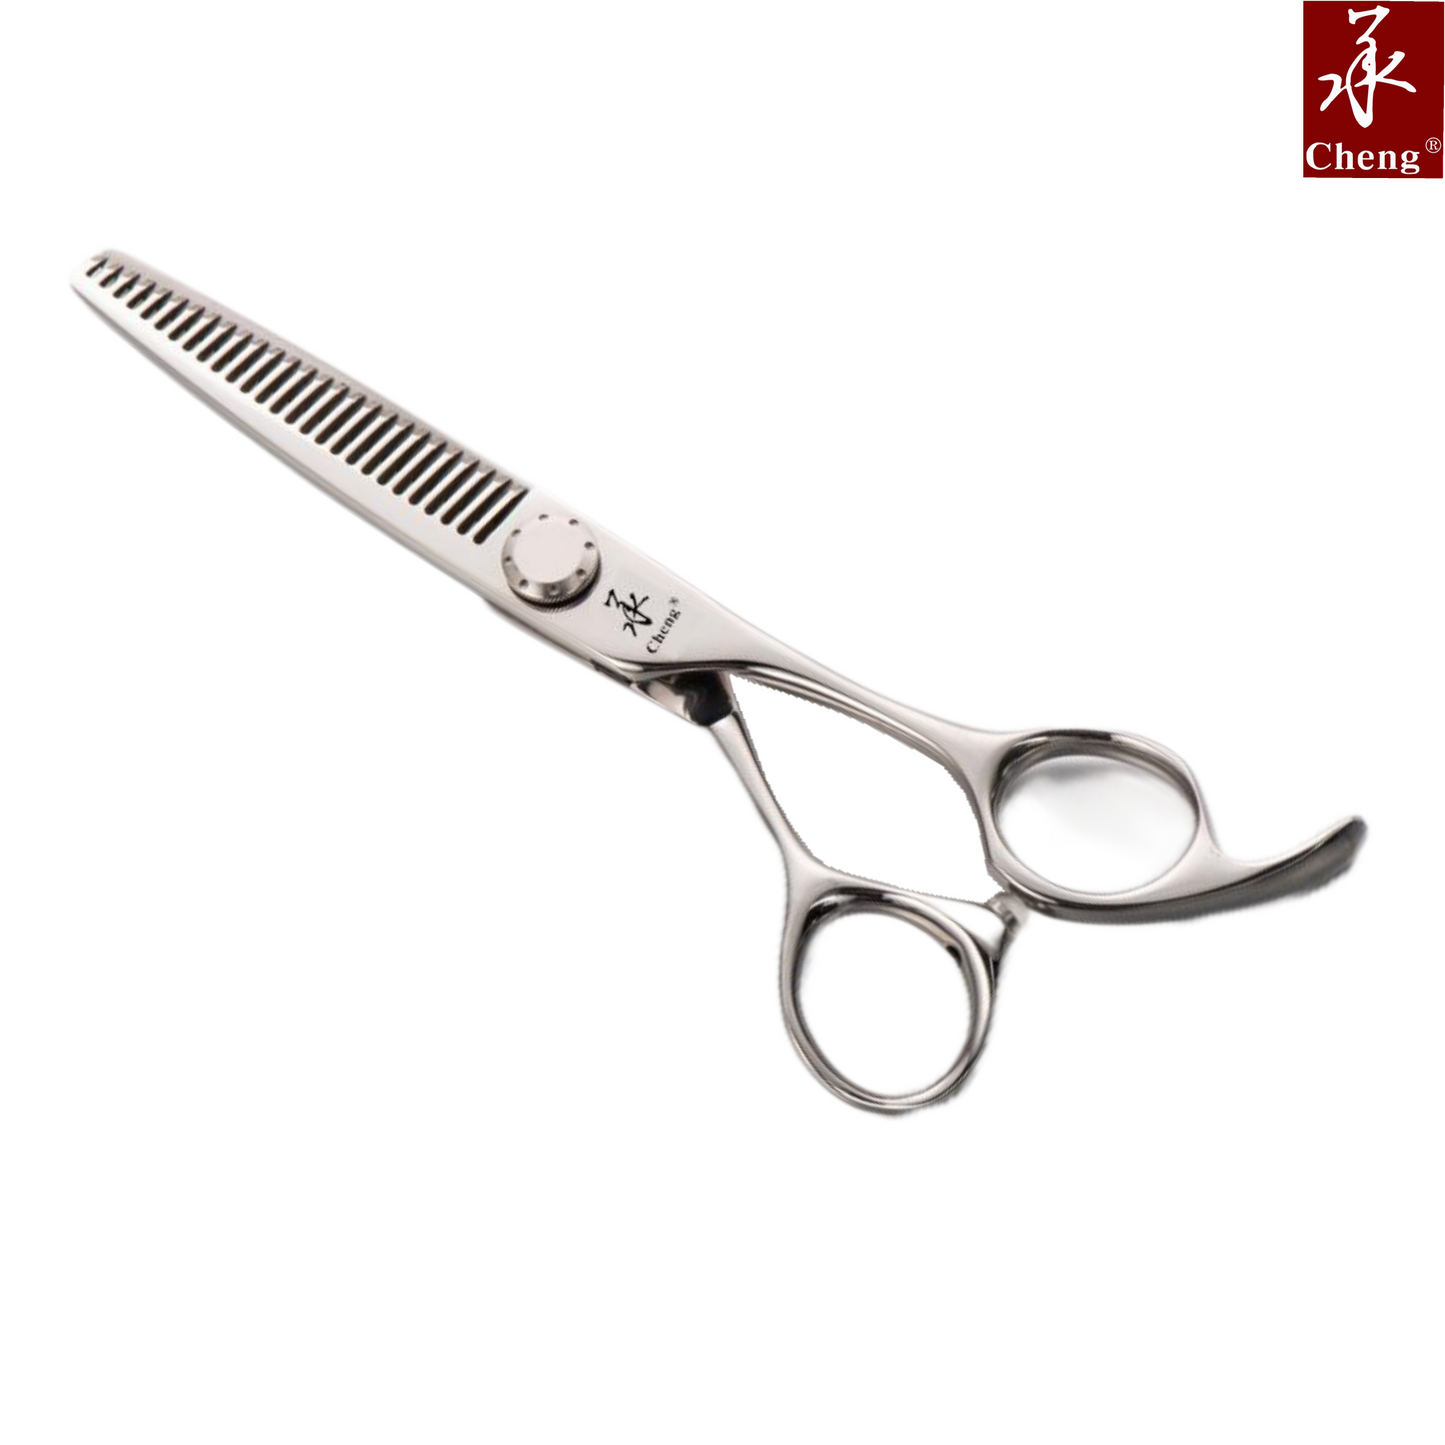 UA-614TZ Hair Thinning Scissors Cutting 6"14T Stainless Steel About=45%